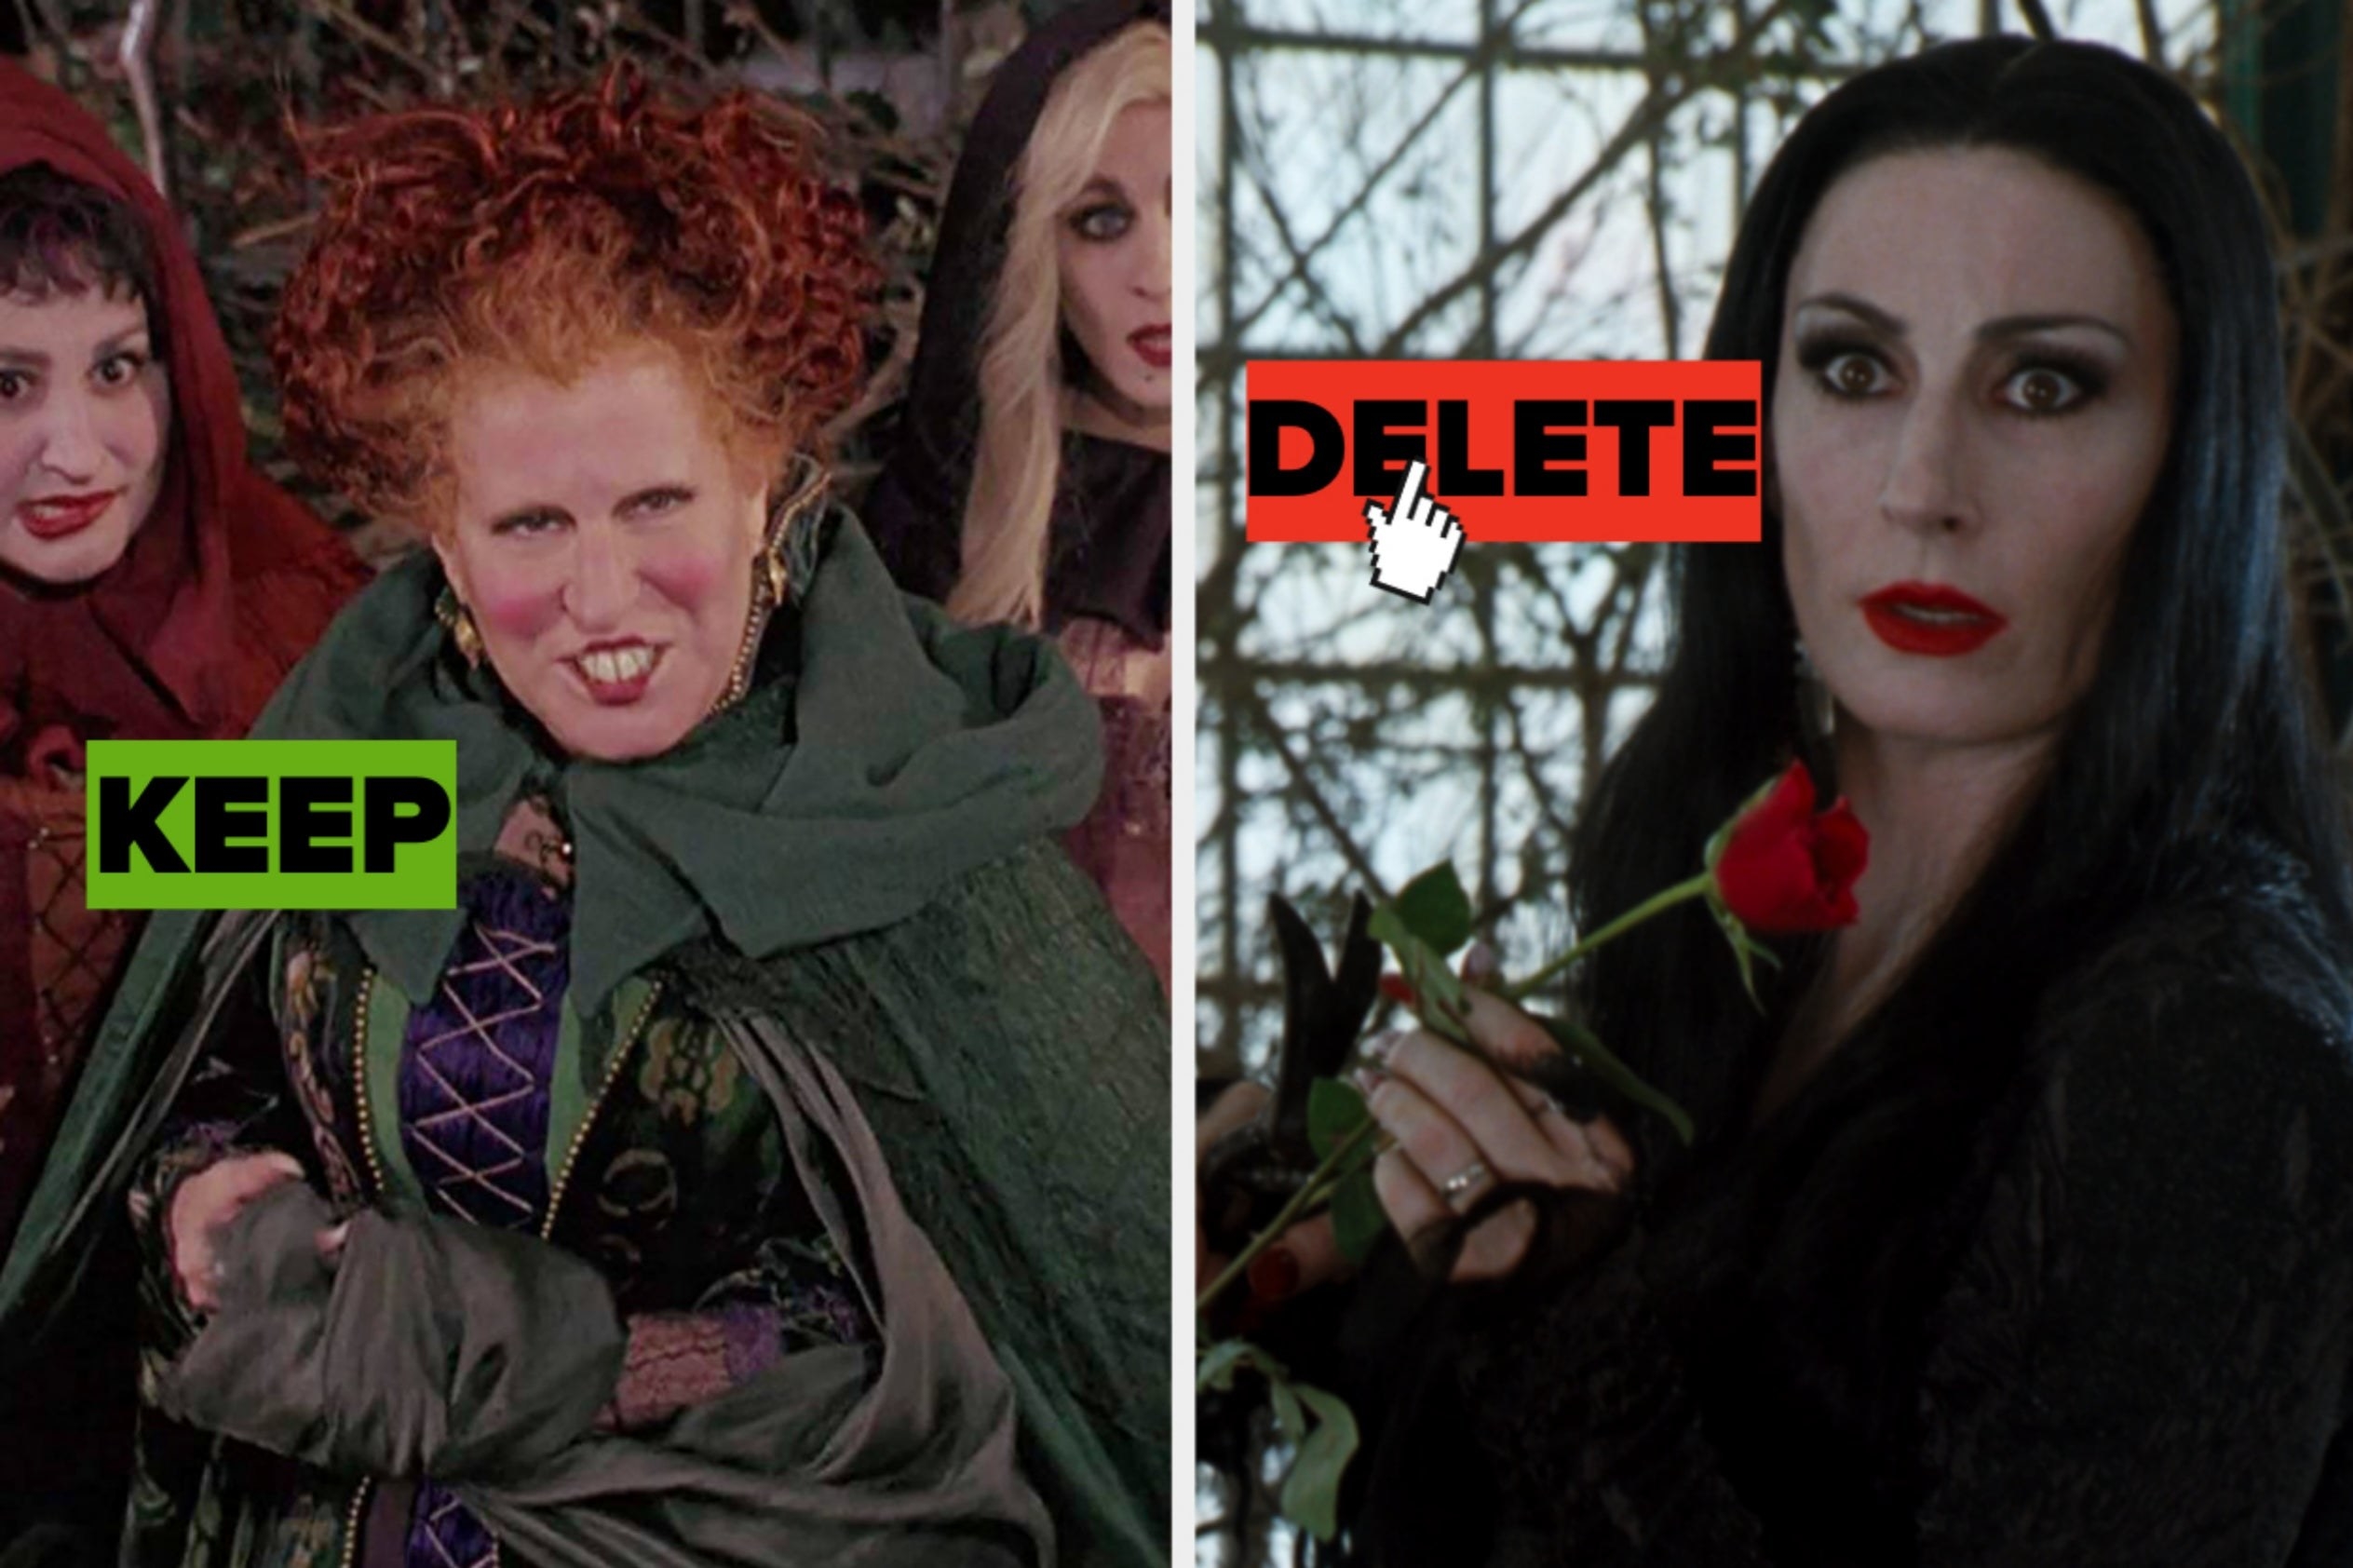 Two images; on the left: a still of the sisters from &quot;Hocus Pocus&quot; and a green box reading &quot;KEEP&quot; overlayed on top and on the right: a Morticia Addams image with a red box reading &quot;DELETE&quot; and mouse cursor overlayed on top